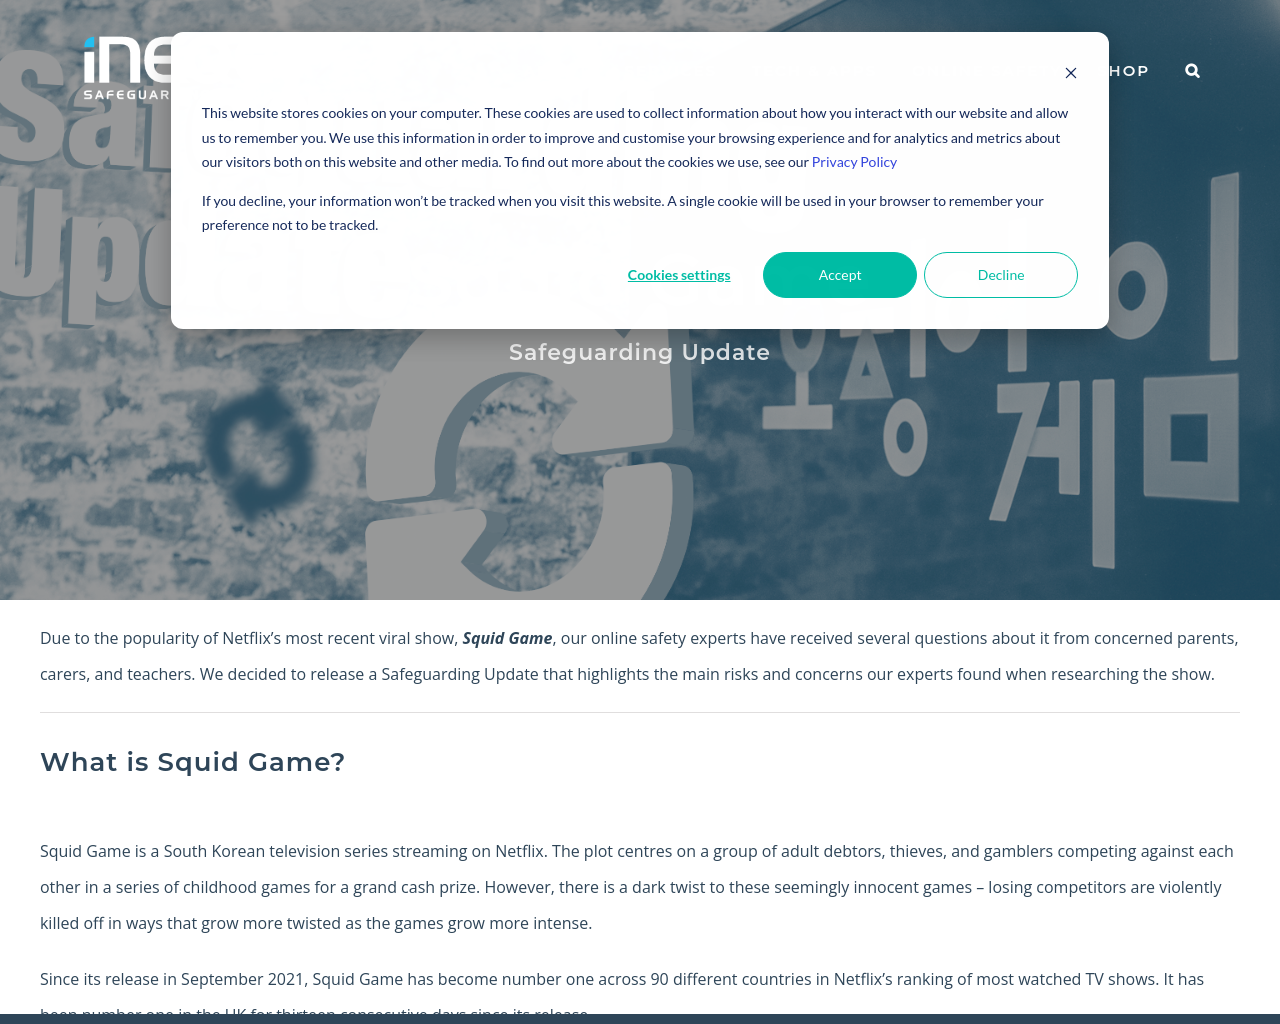 Ineqe Safeguarding Group - Squid Game 